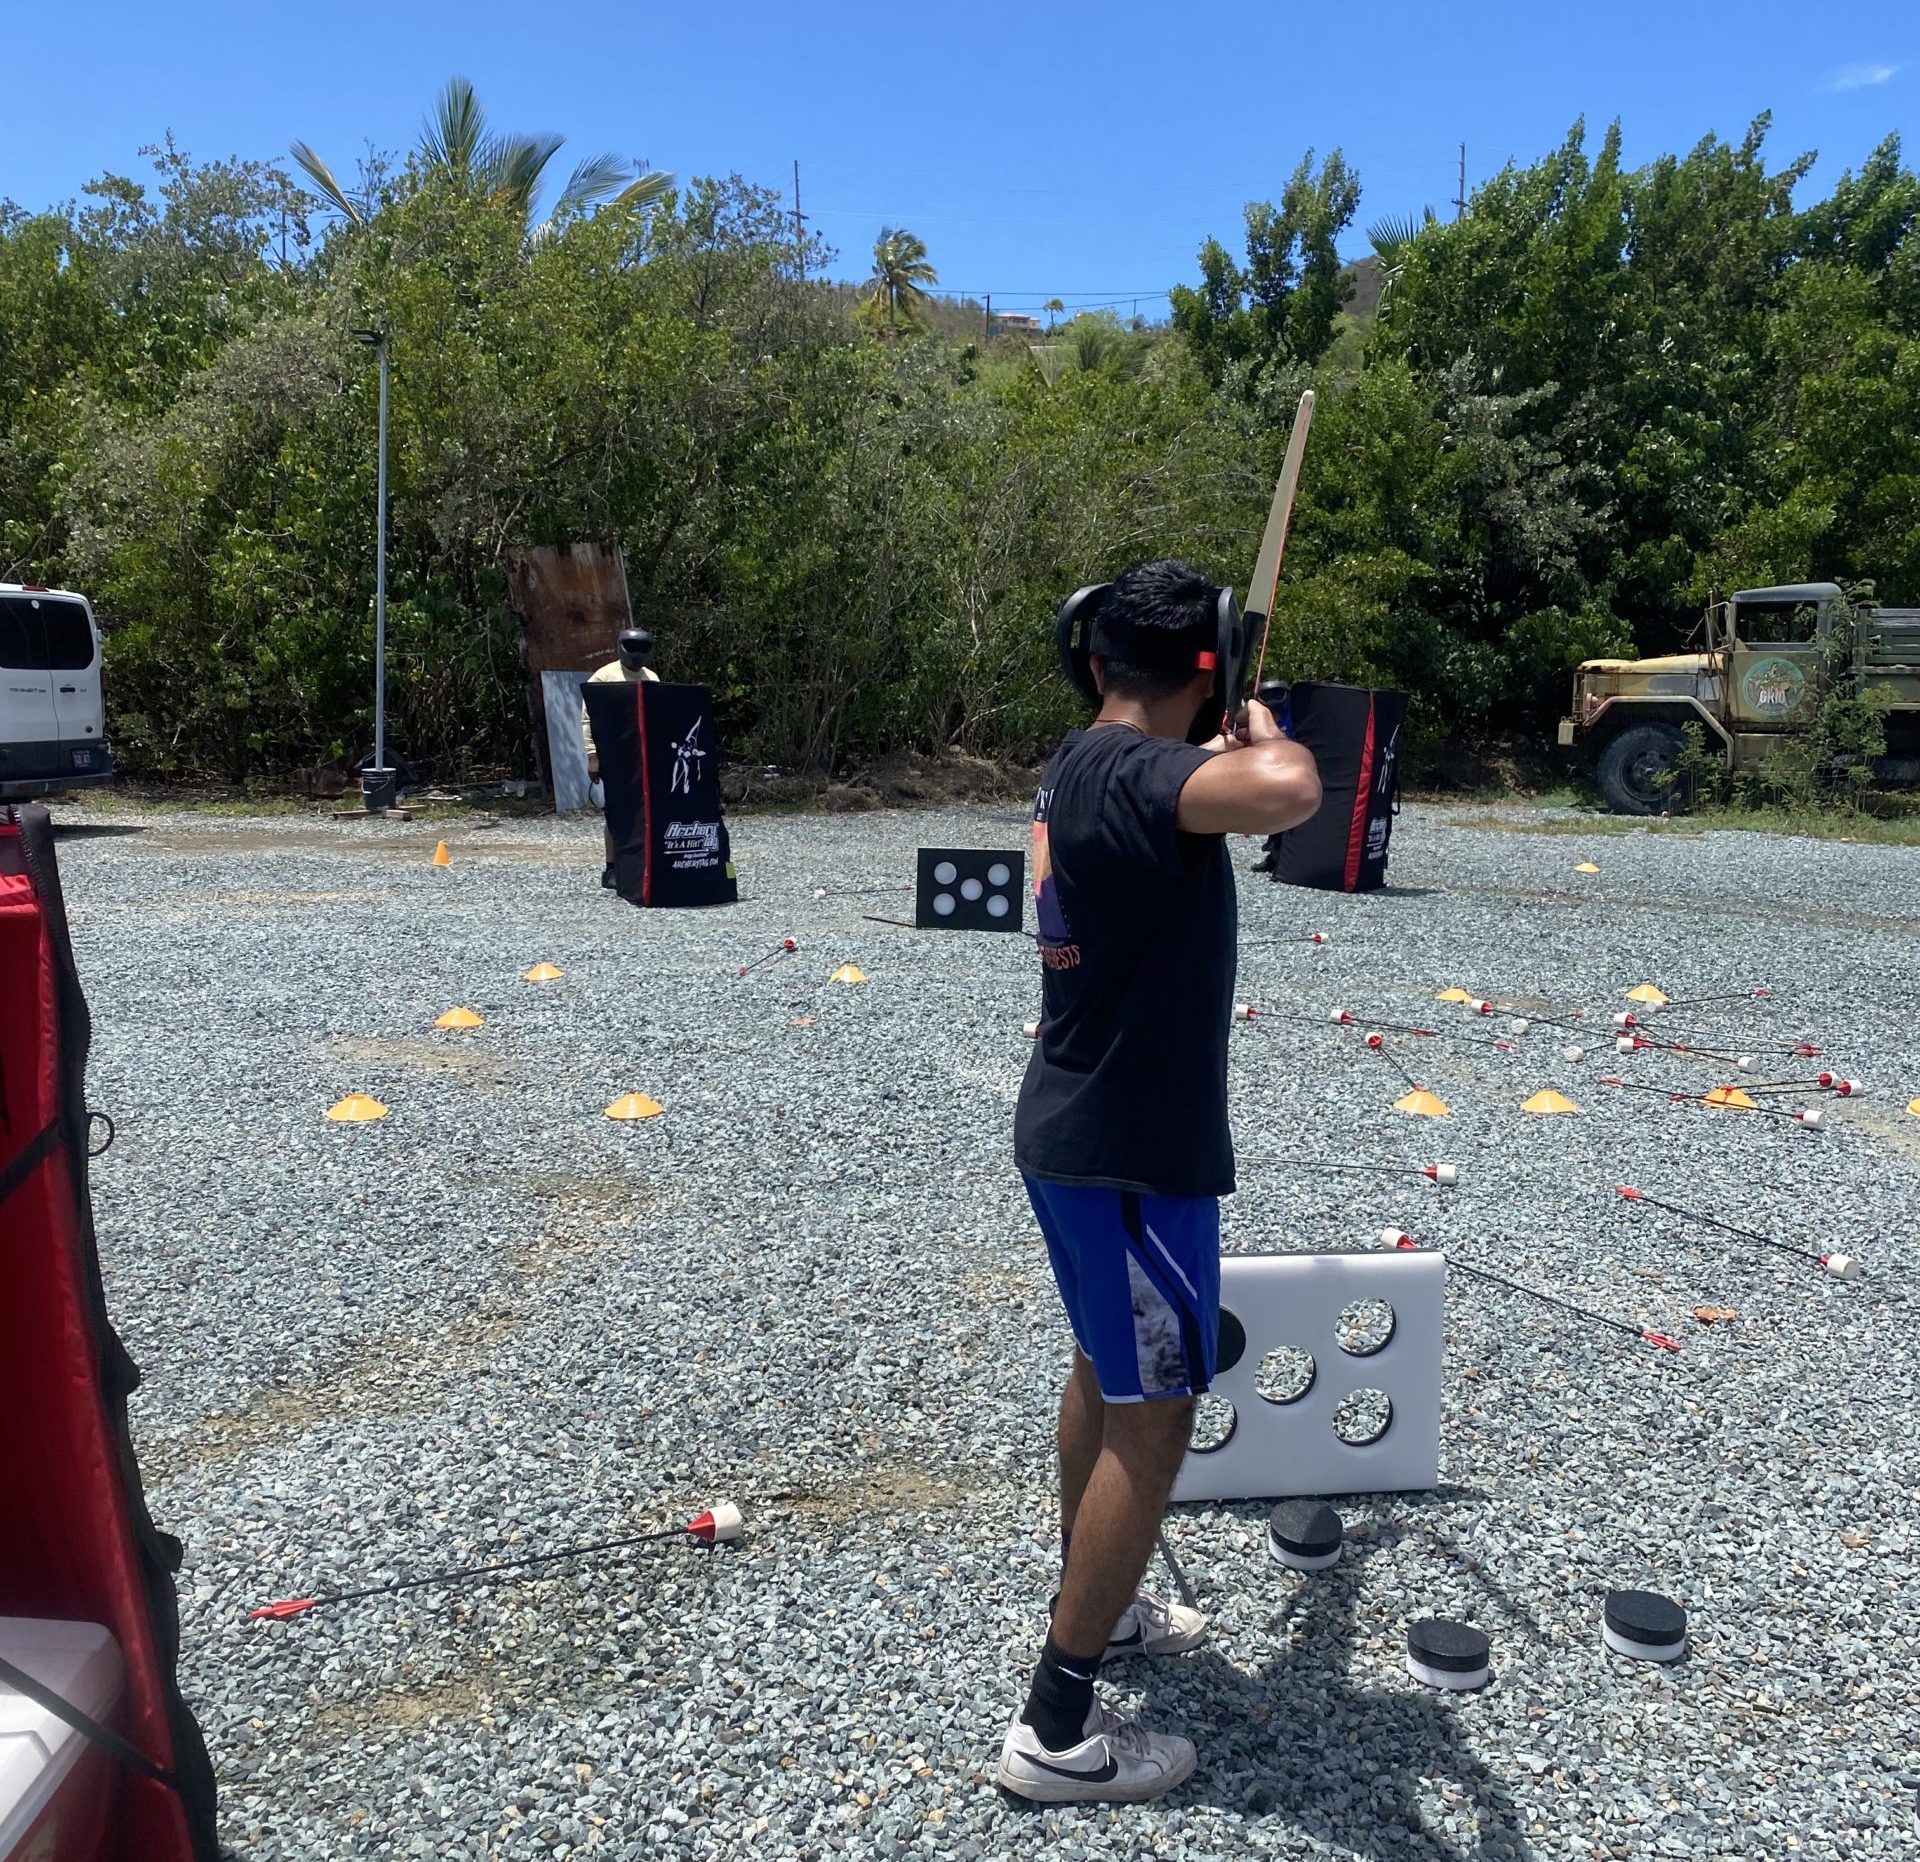 A man in a gravel parking lot and a protective face mask draws a bow and arrow toward a target